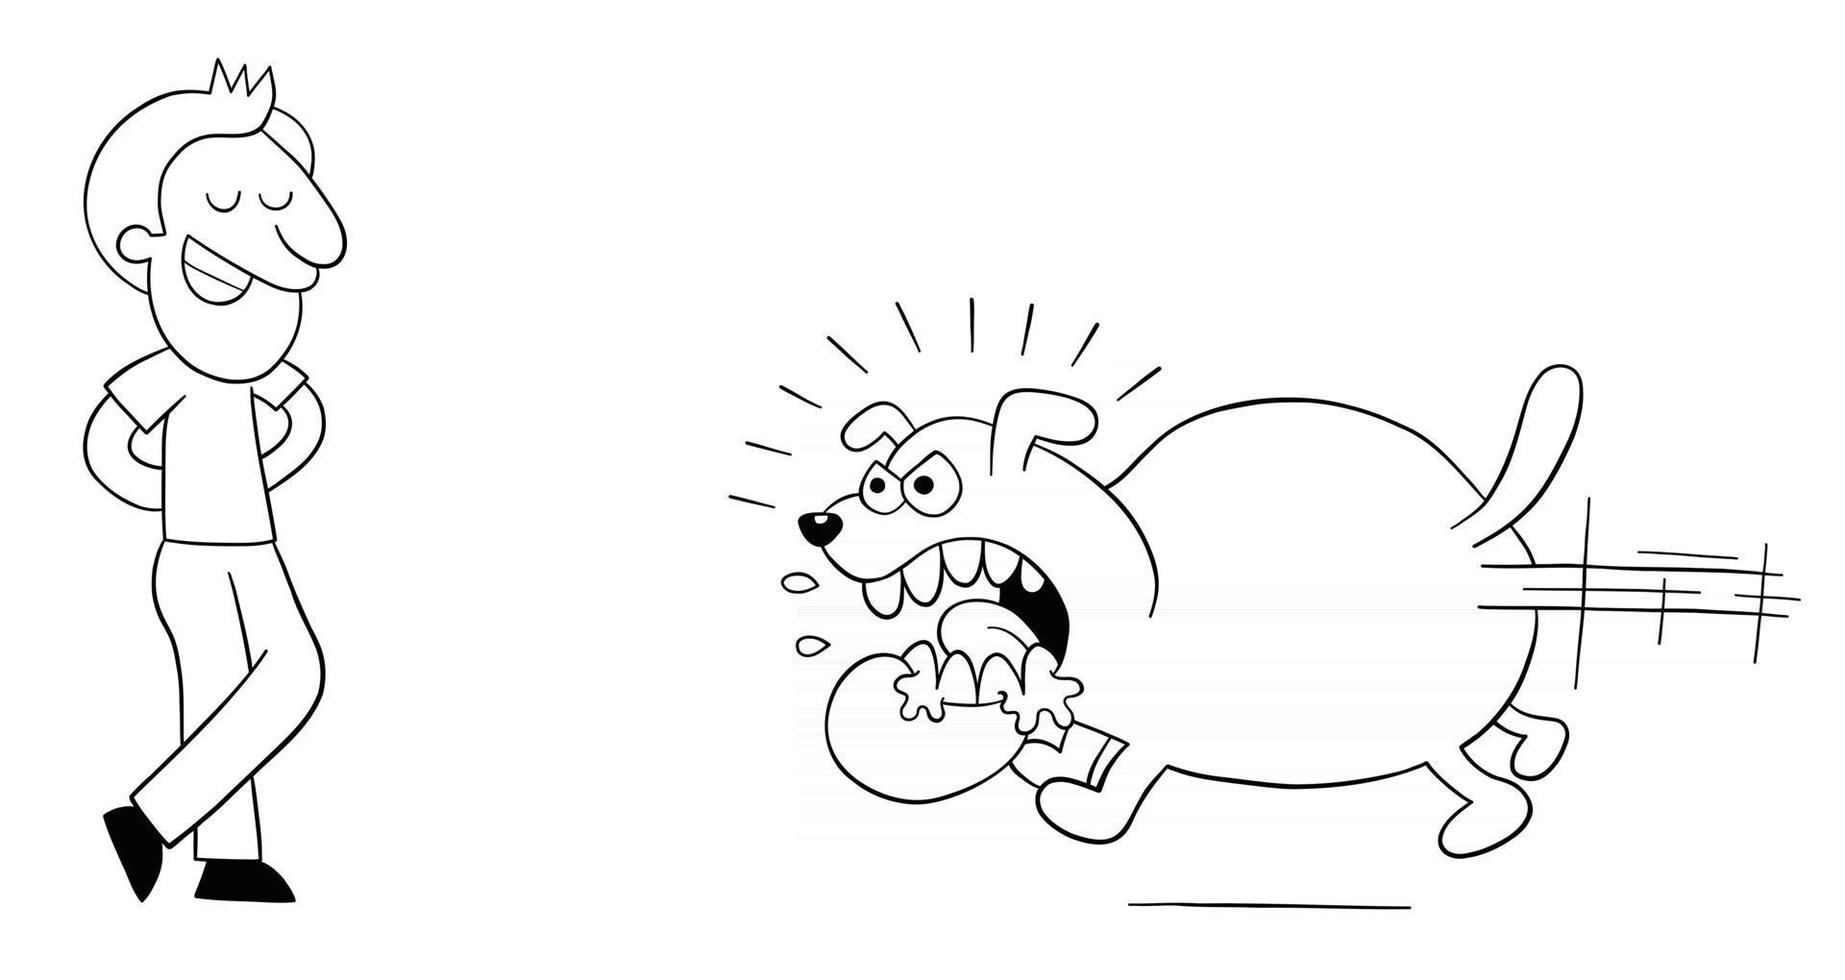 Cartoon Angry and Huge Dog Runs to Bite the Man But the Man is not Afraid Vector Illustration